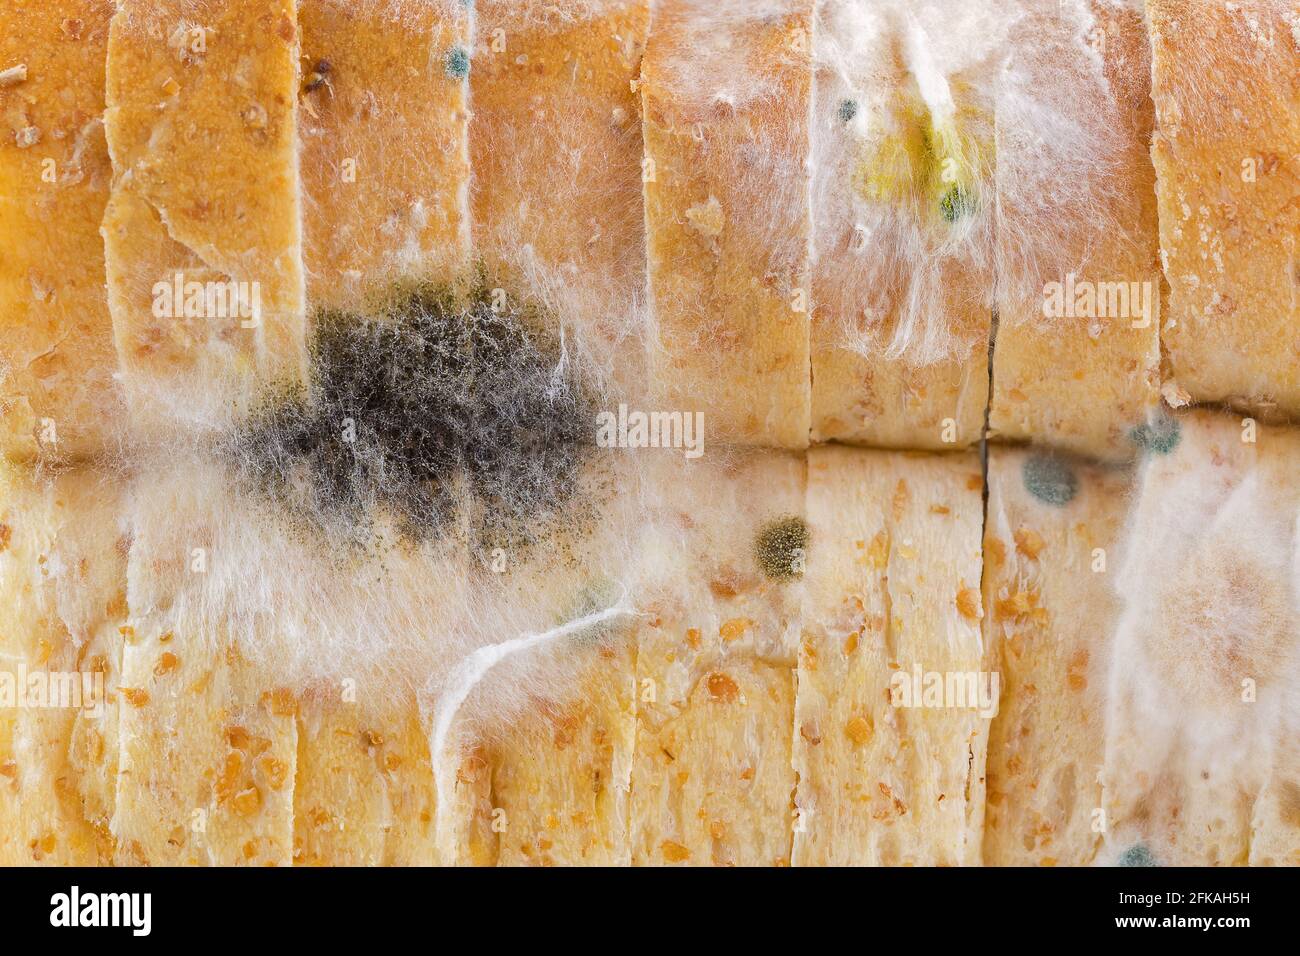 https://c8.alamy.com/comp/2FKAH5H/closeup-texture-of-black-yellow-blue-white-molds-on-molded-old-wholewheat-bread-2FKAH5H.jpg